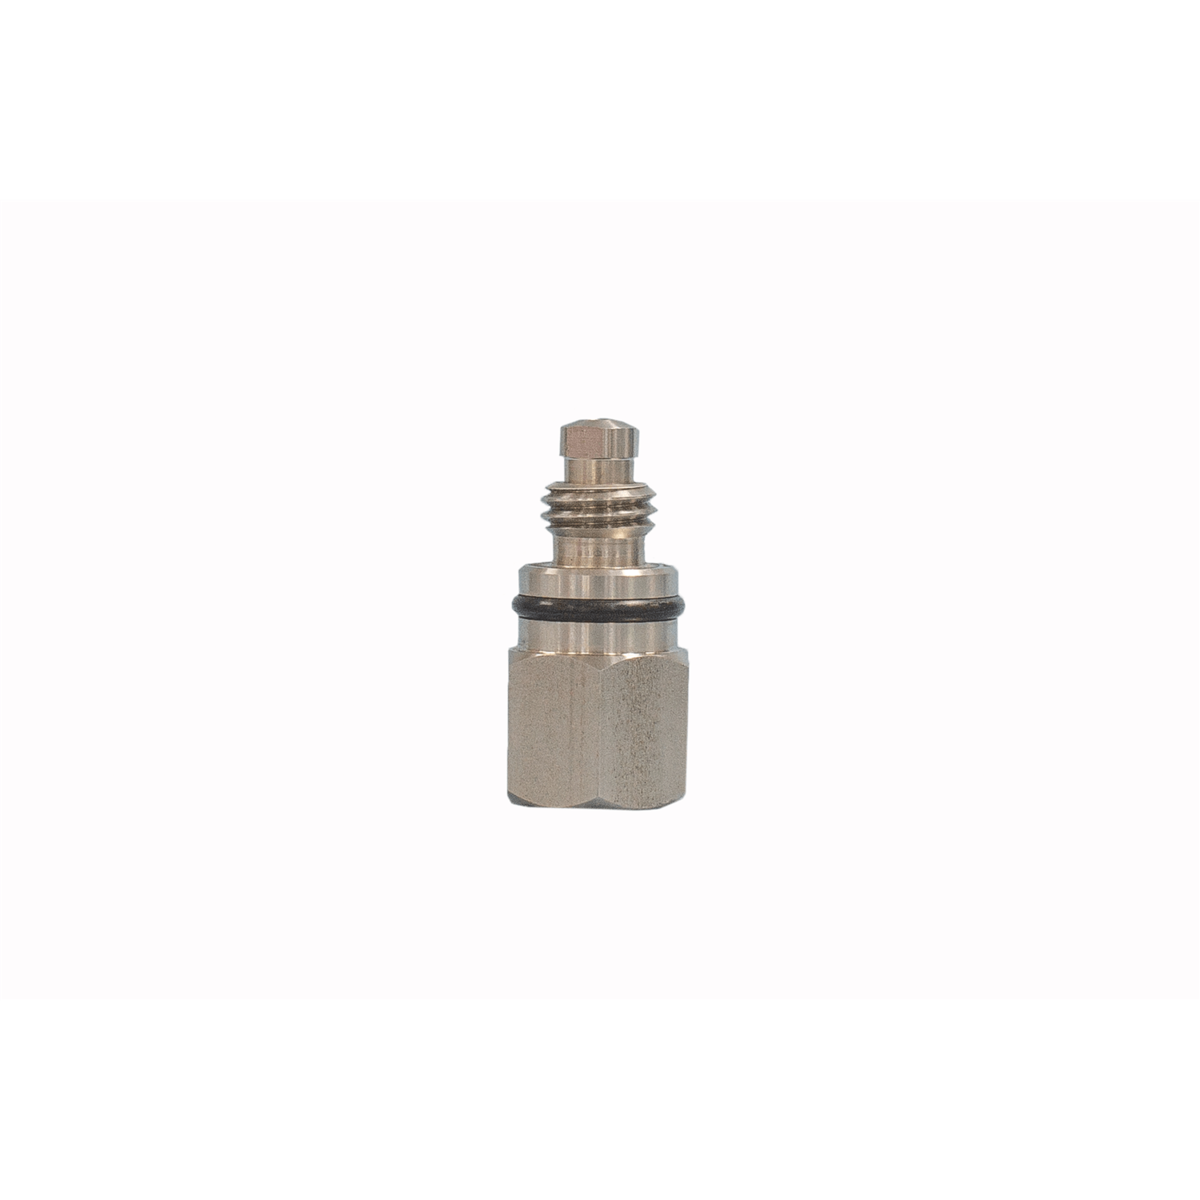 Water Plus Corp Replacement SS "Screw Type" Main Valve for All "Svlv" Below Grade Sampling Stations